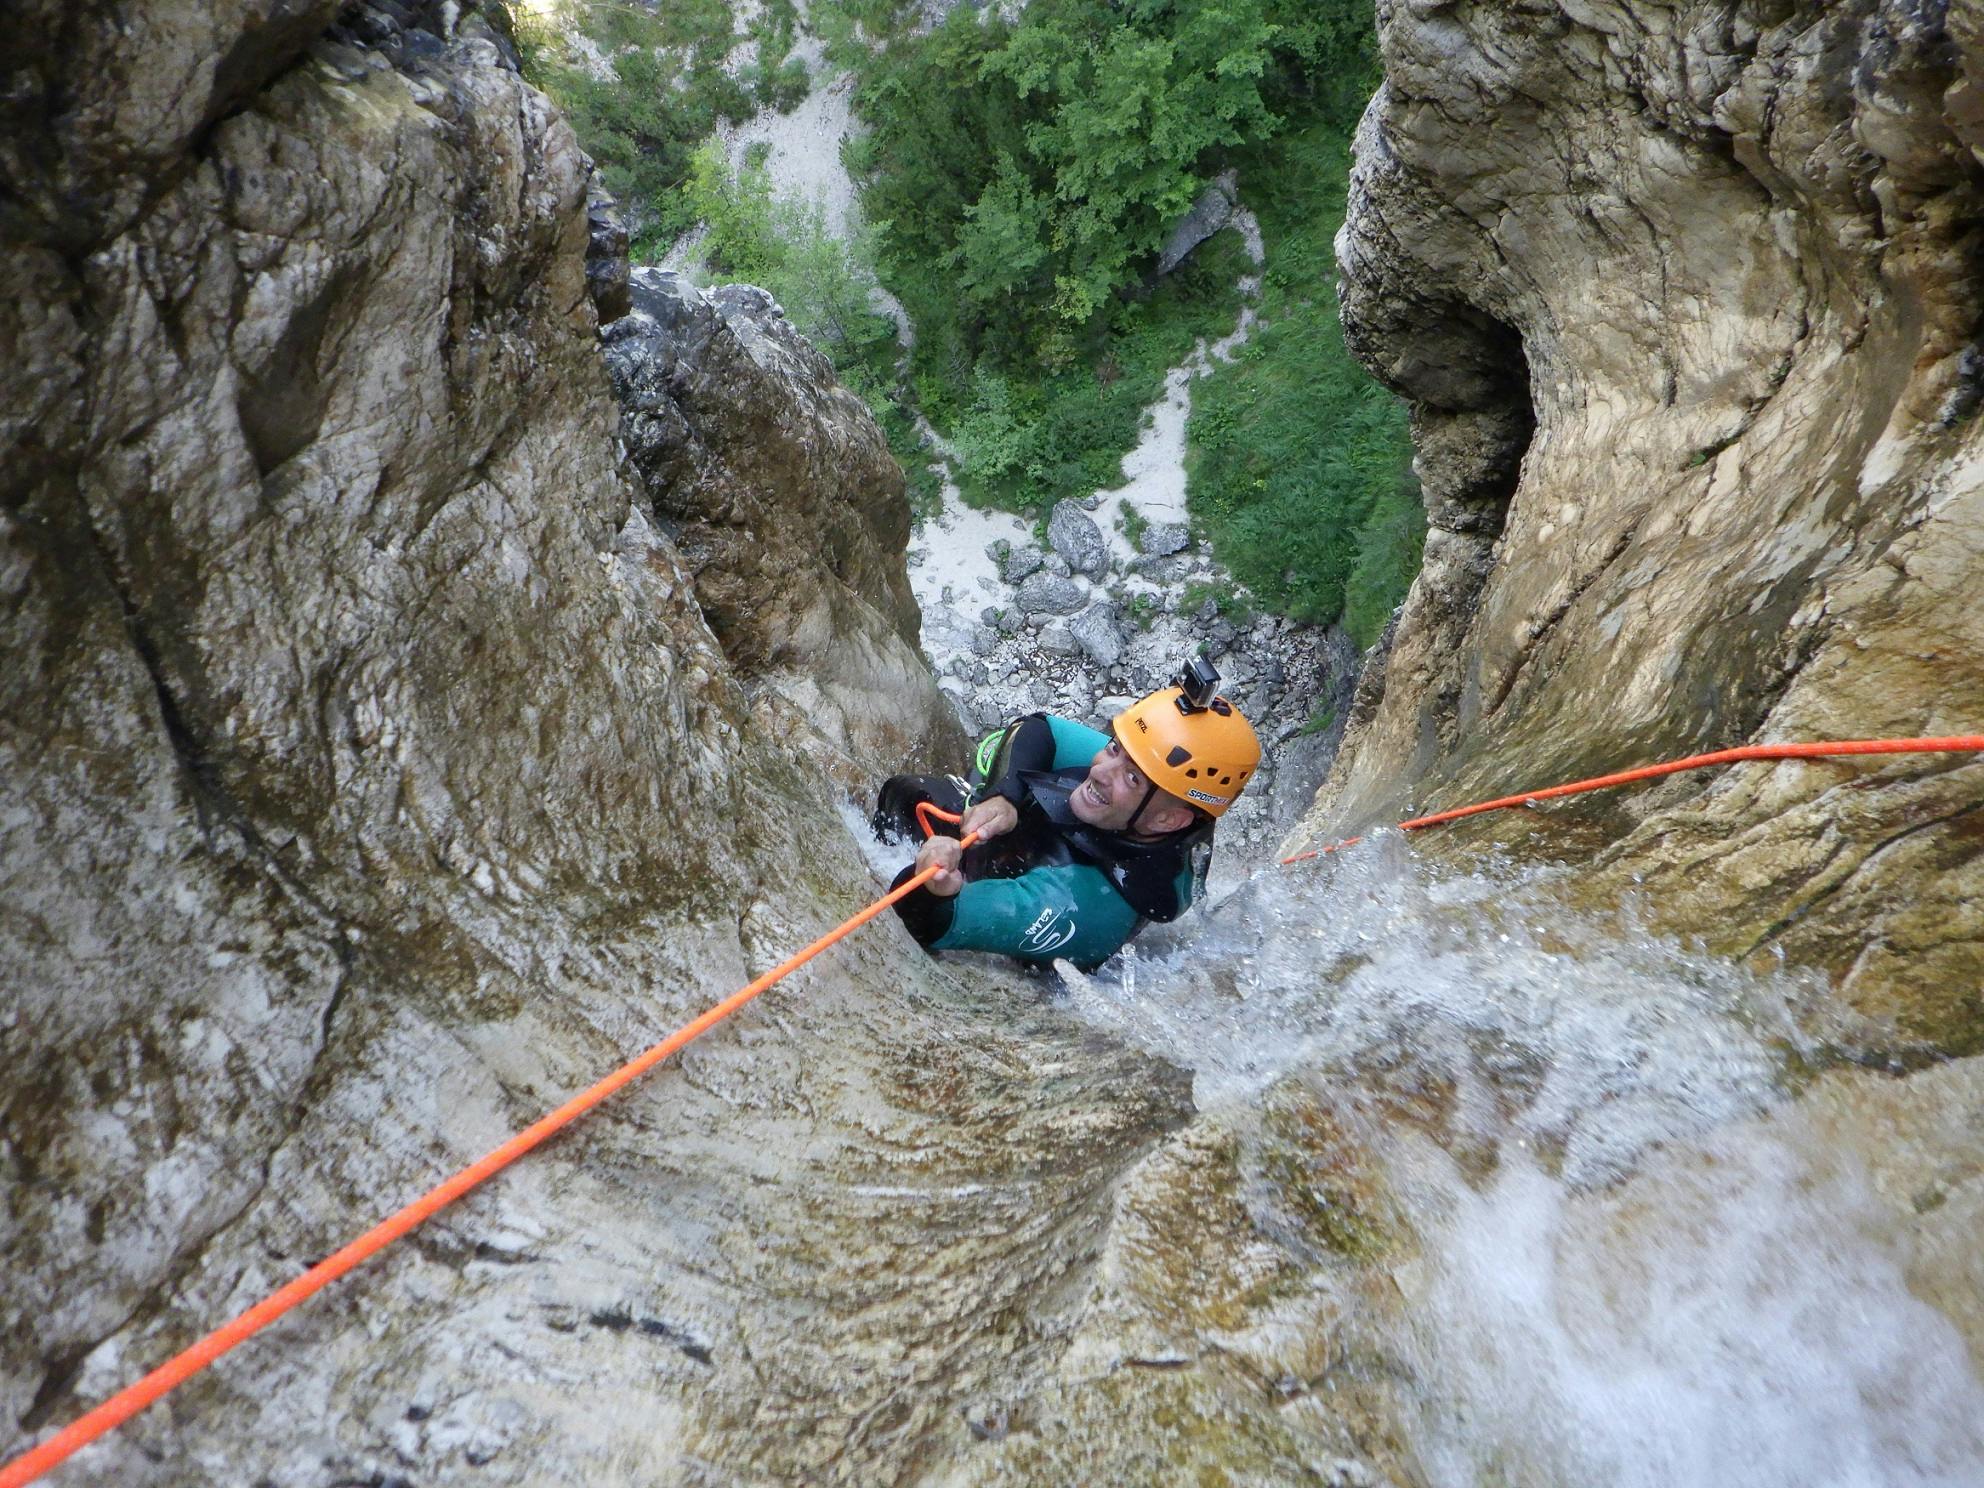 Canyoning in the Fratarica Canyon from Bovec